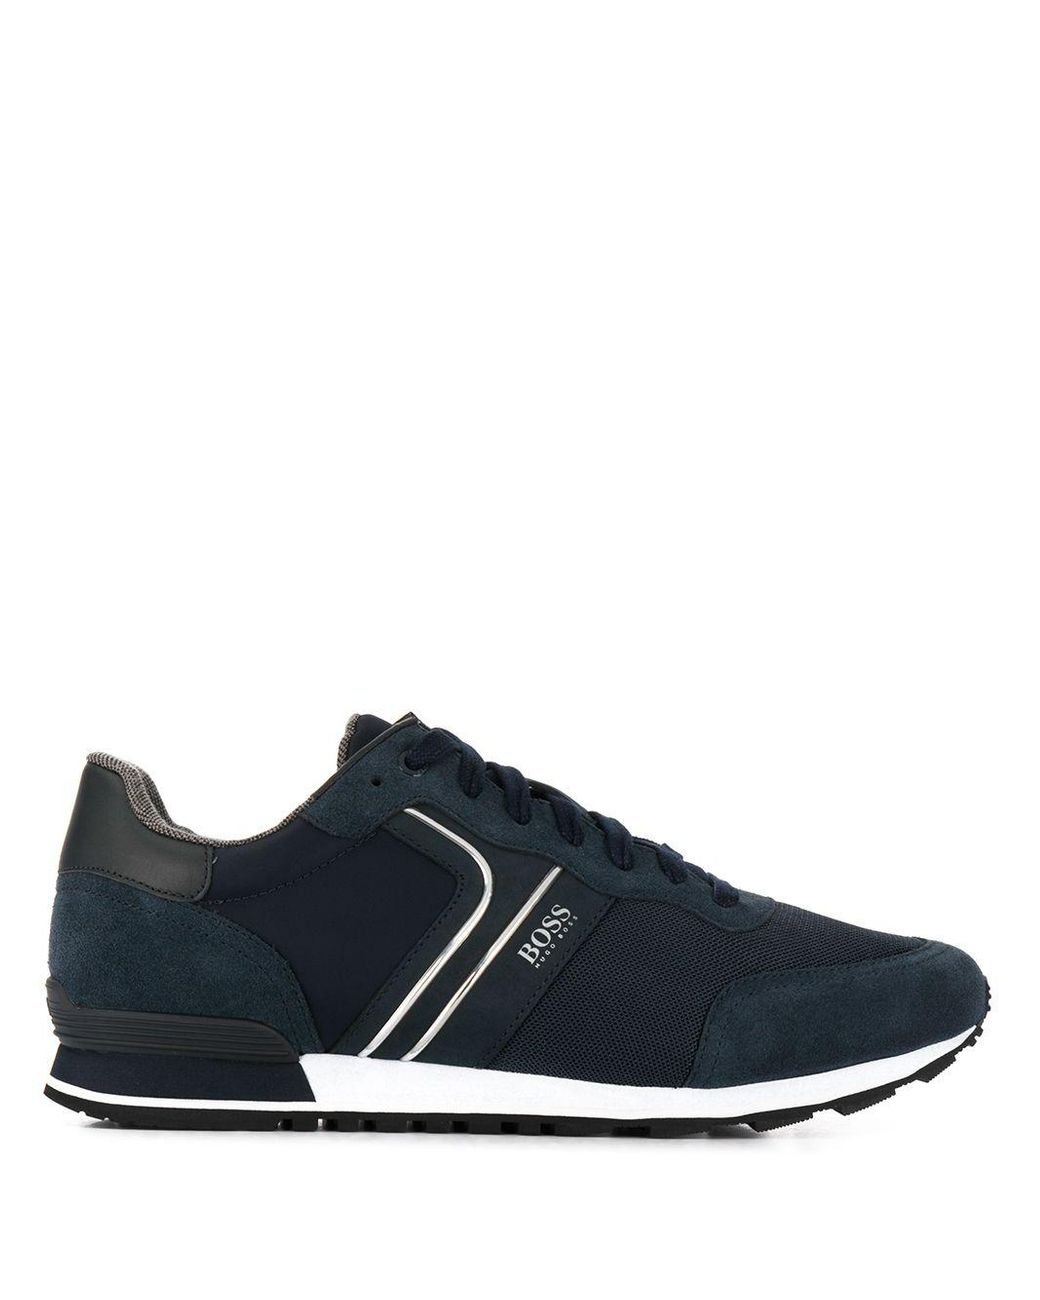 BOSS by Hugo Boss Leather Panelled Low-top Sneakers in Blue for Men - Lyst